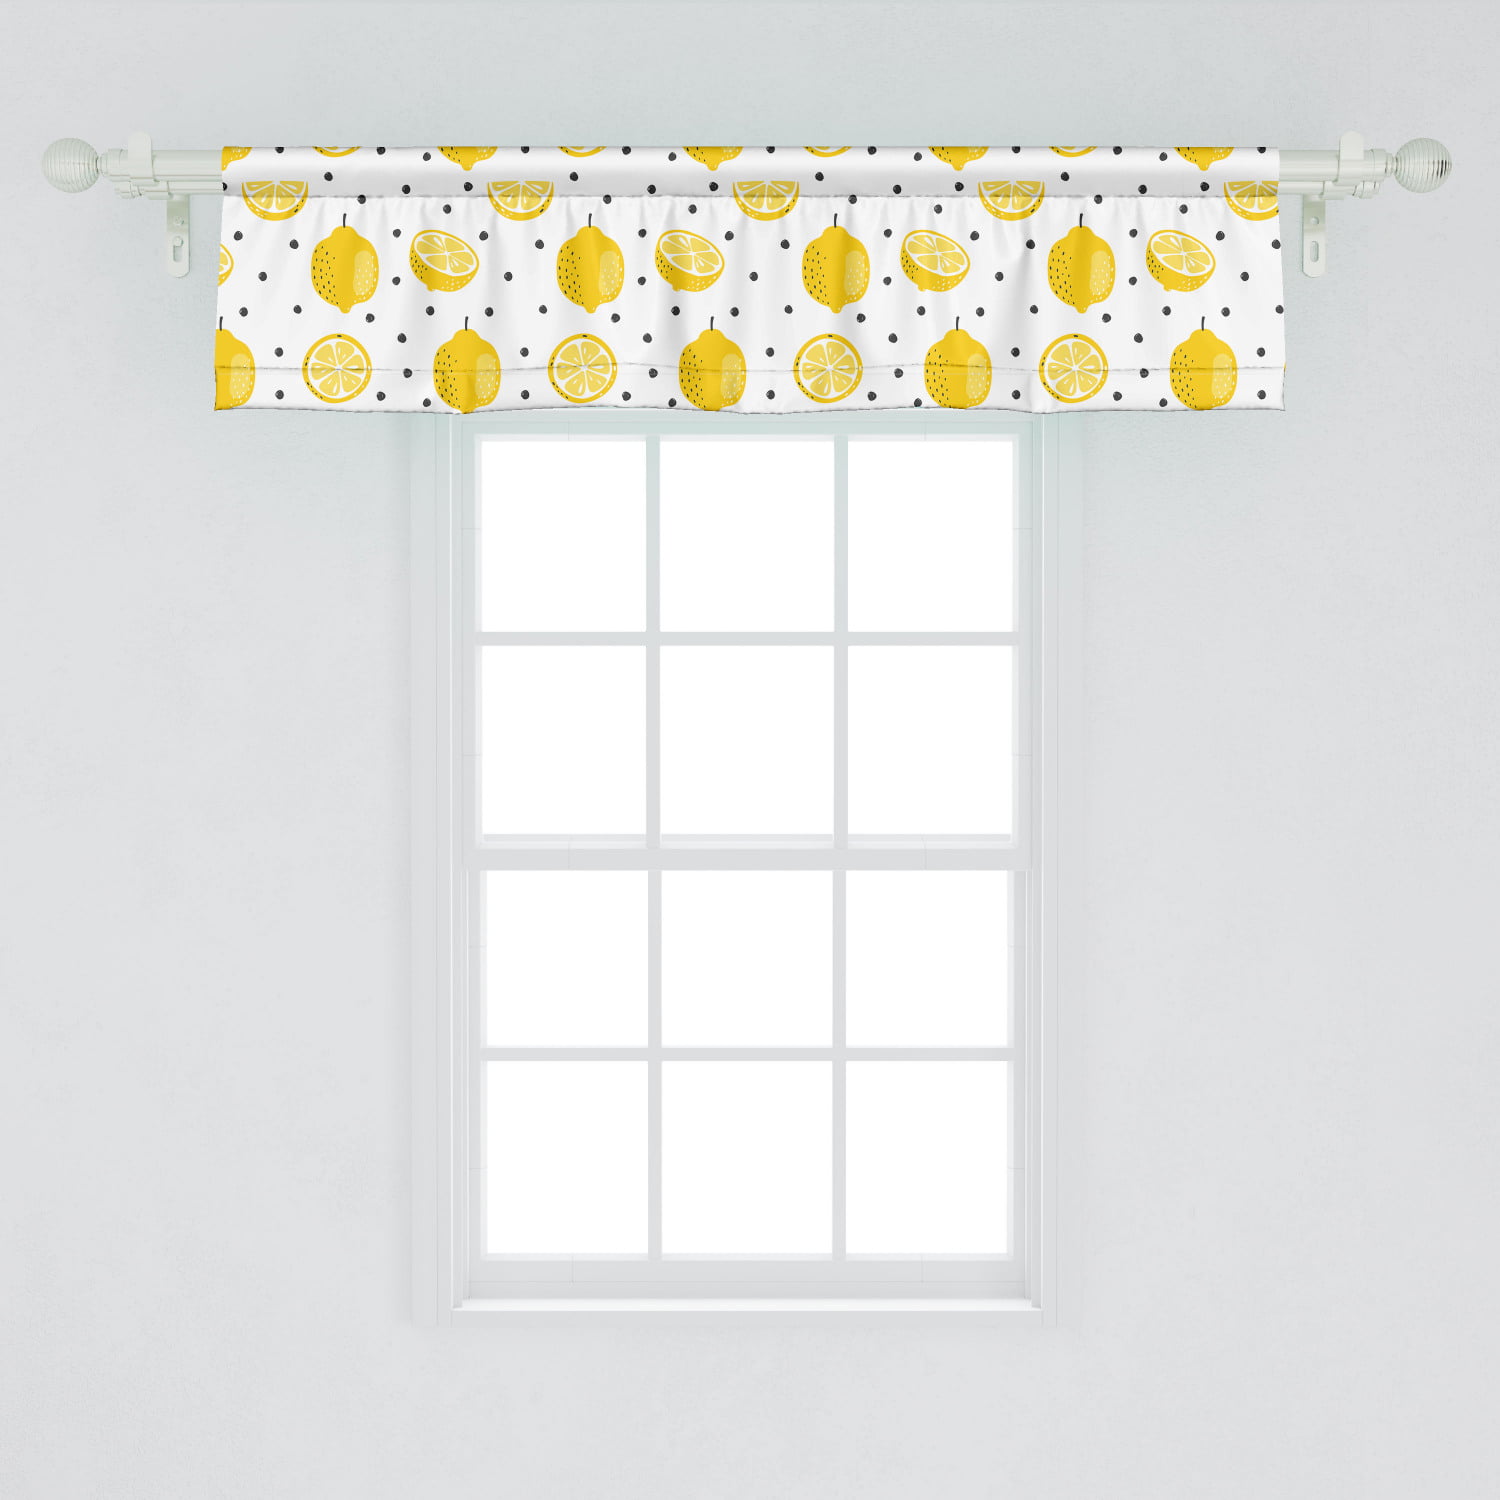 Ambesonne Lemon Window Valance, Summer Pattern of Whole and Halved Citrus  Fruit with Polka Dots, Curtain Valance for Kitchen Bedroom Decor with Rod  ... Inspiring